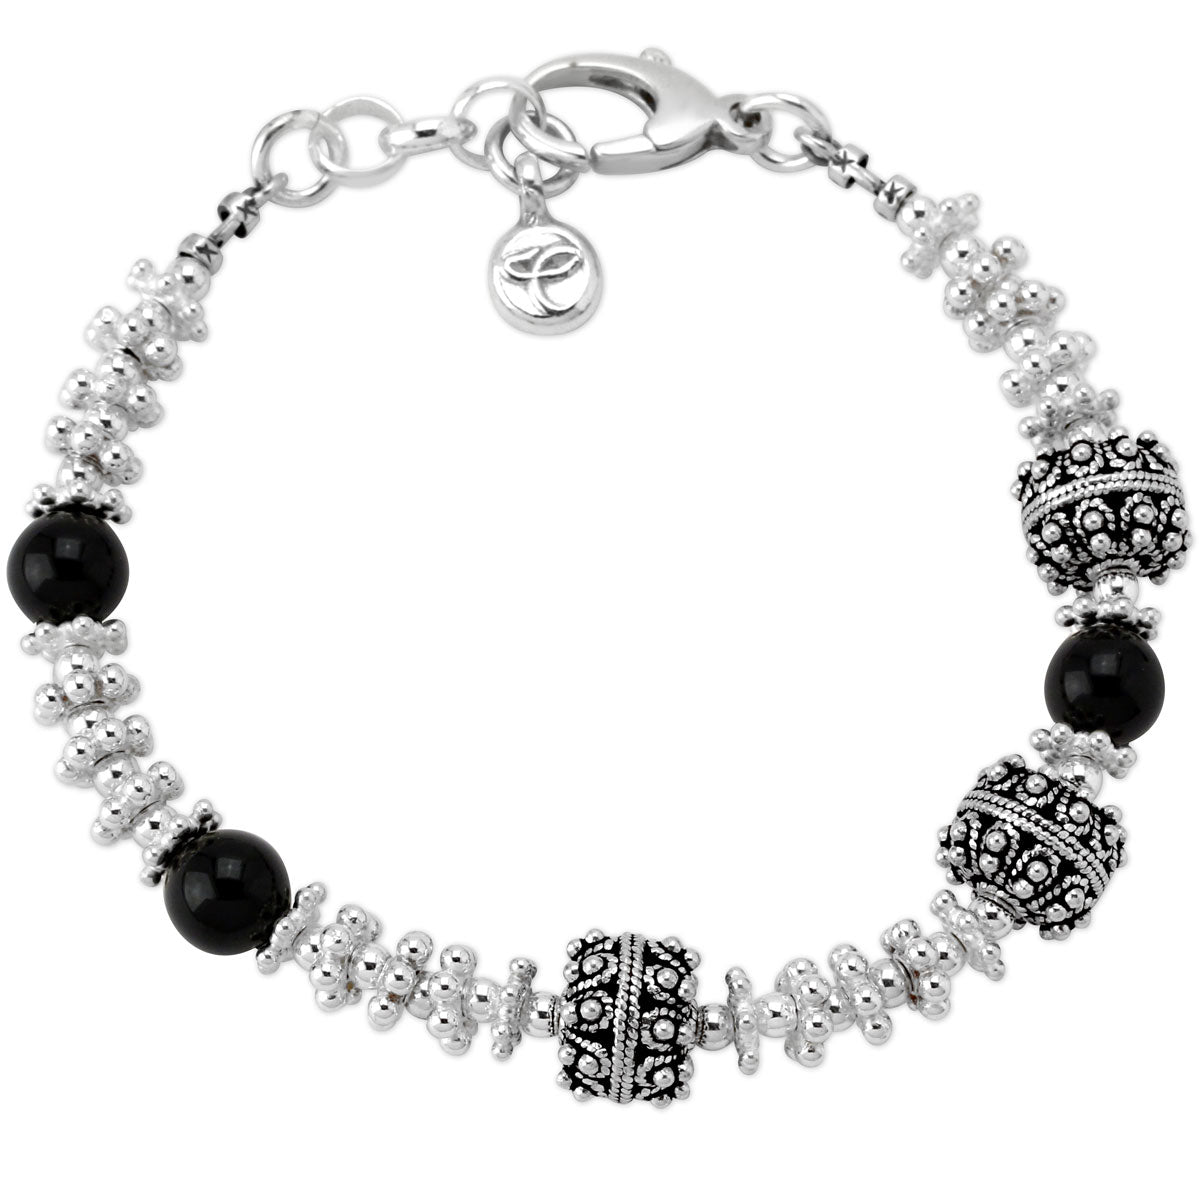 Smooth Onyx and Sterling Silver Bracelet-341889